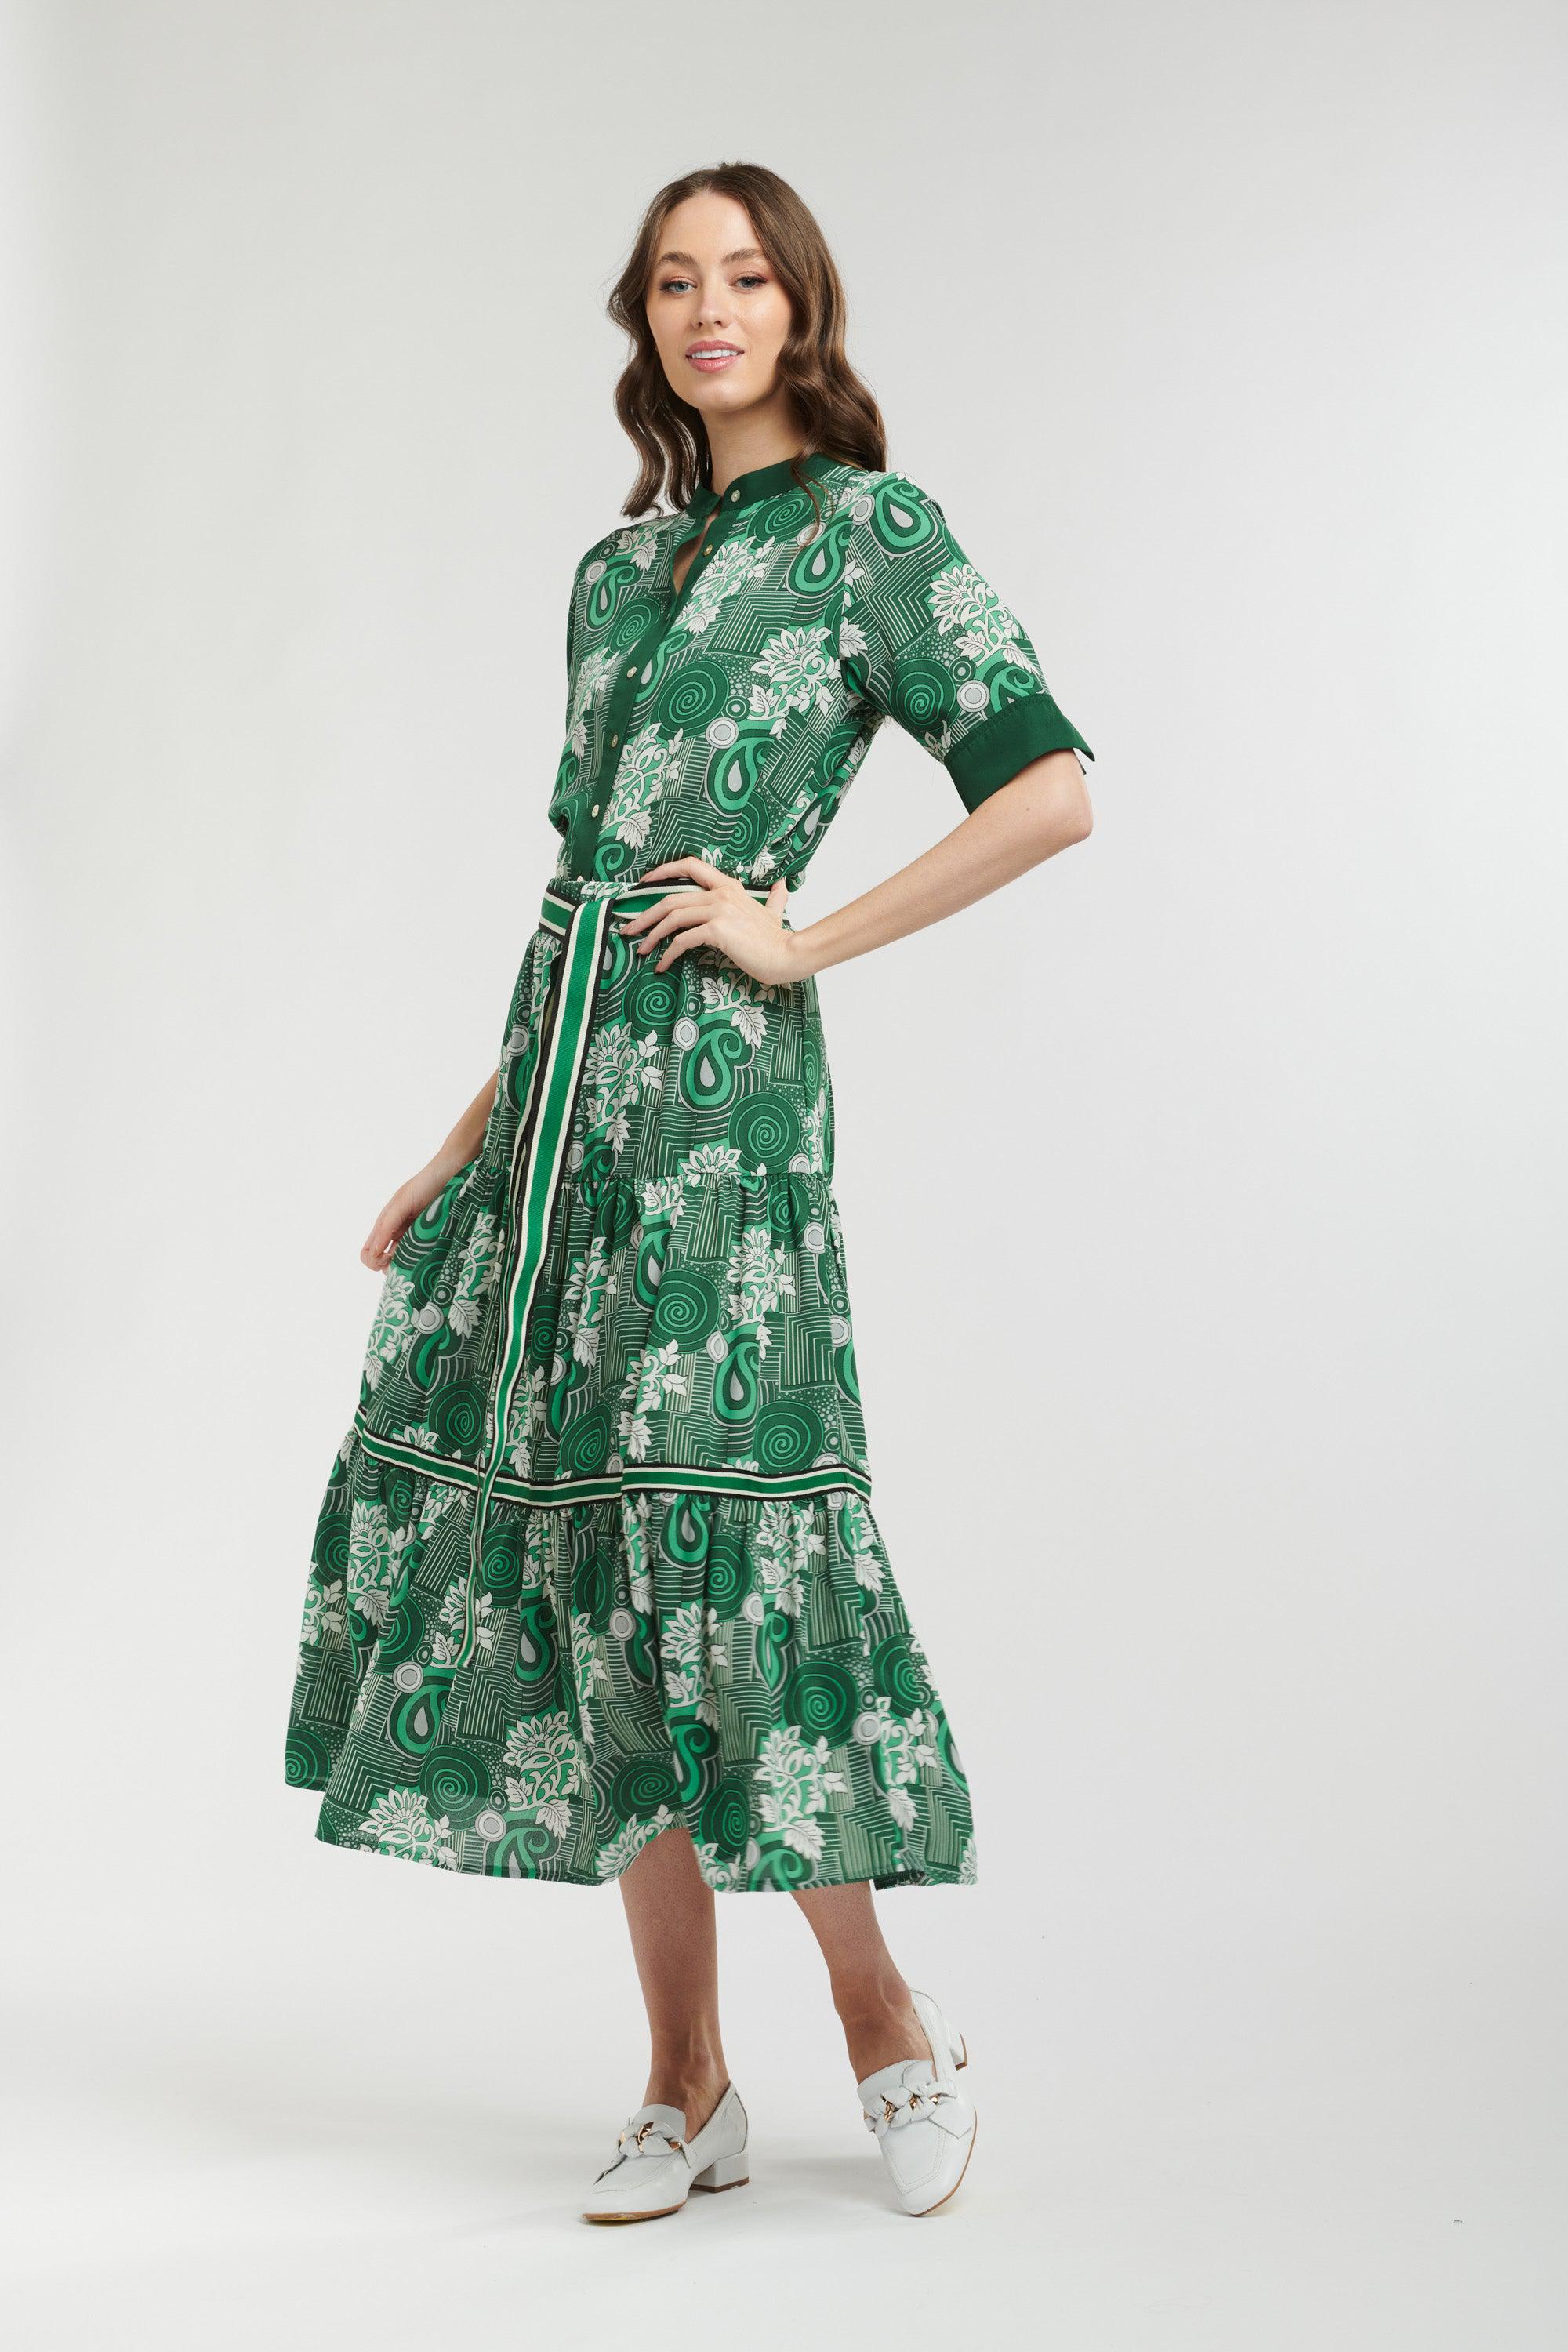 Avery Blouse - Maze Green-Dresses-365 Days-The Bay Room